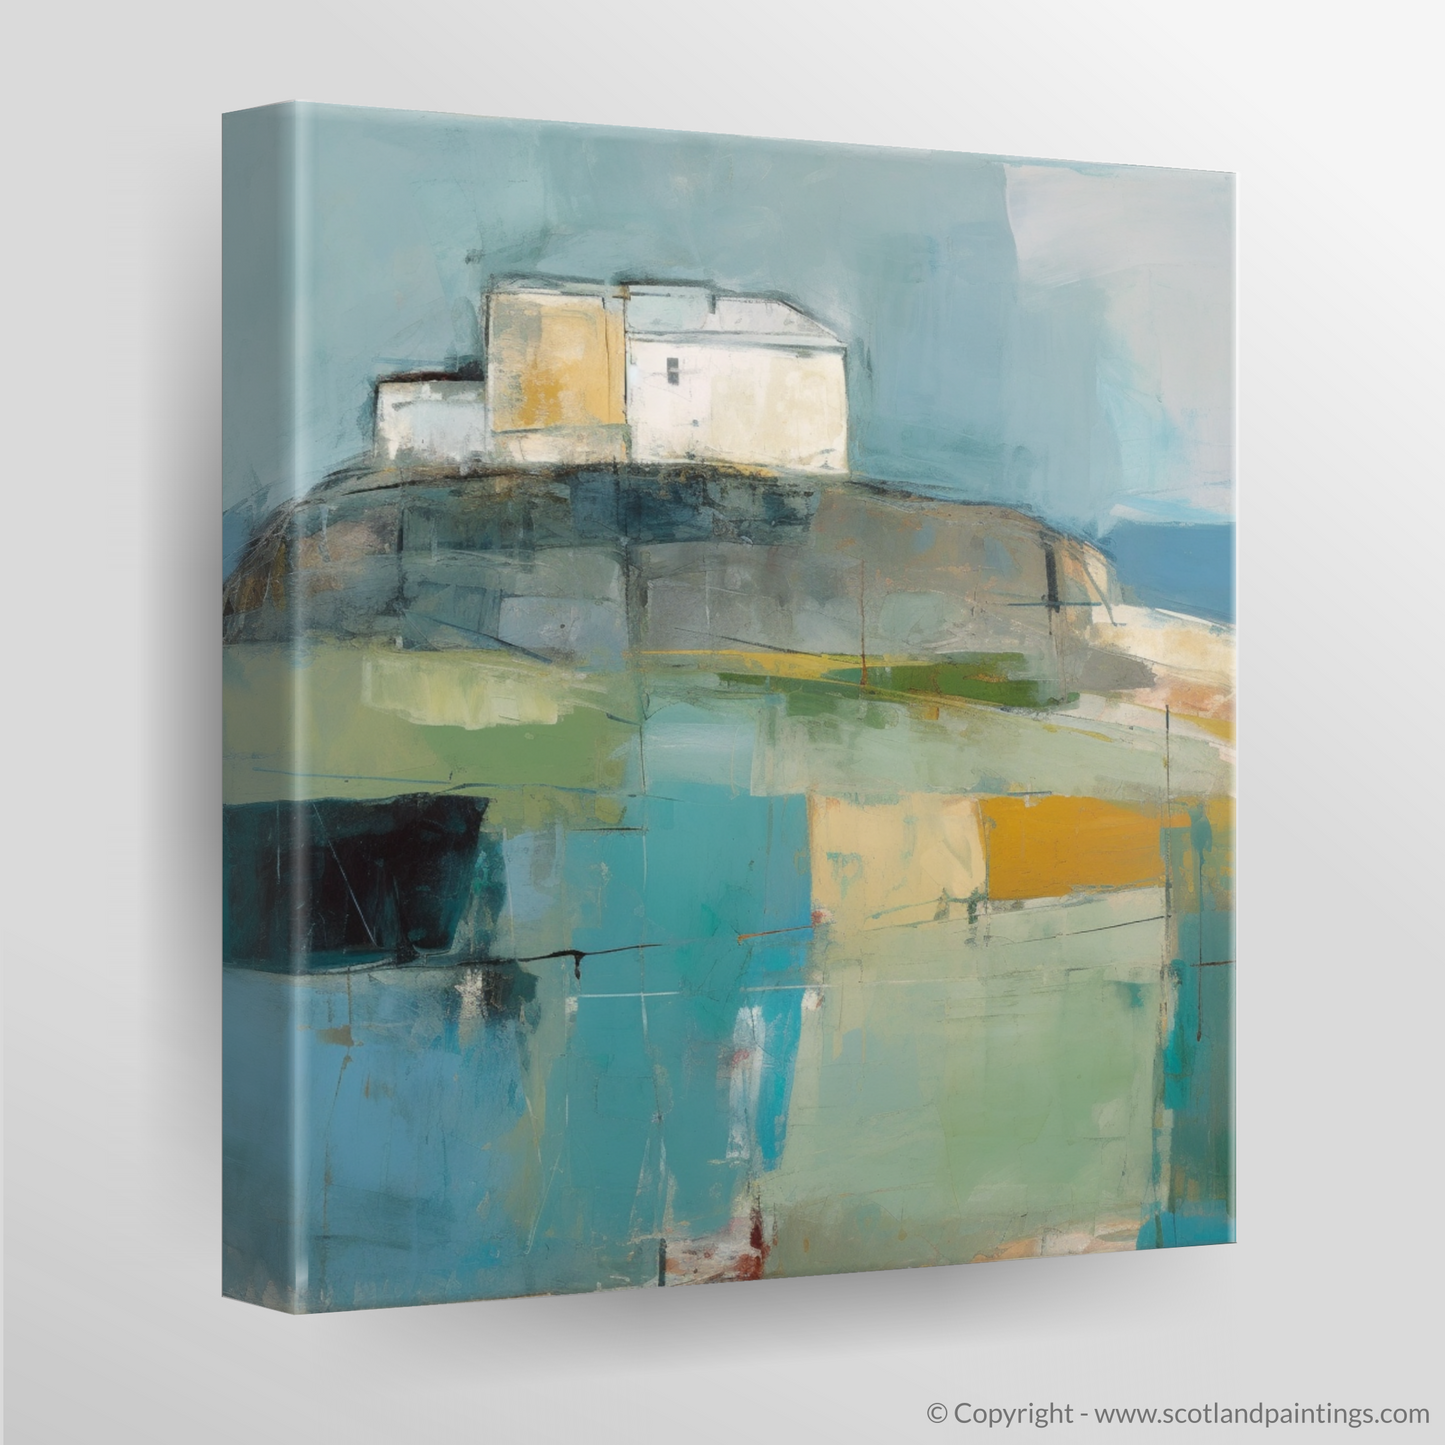 Castle Tioram Reimagined: An Abstract Impressionist Journey